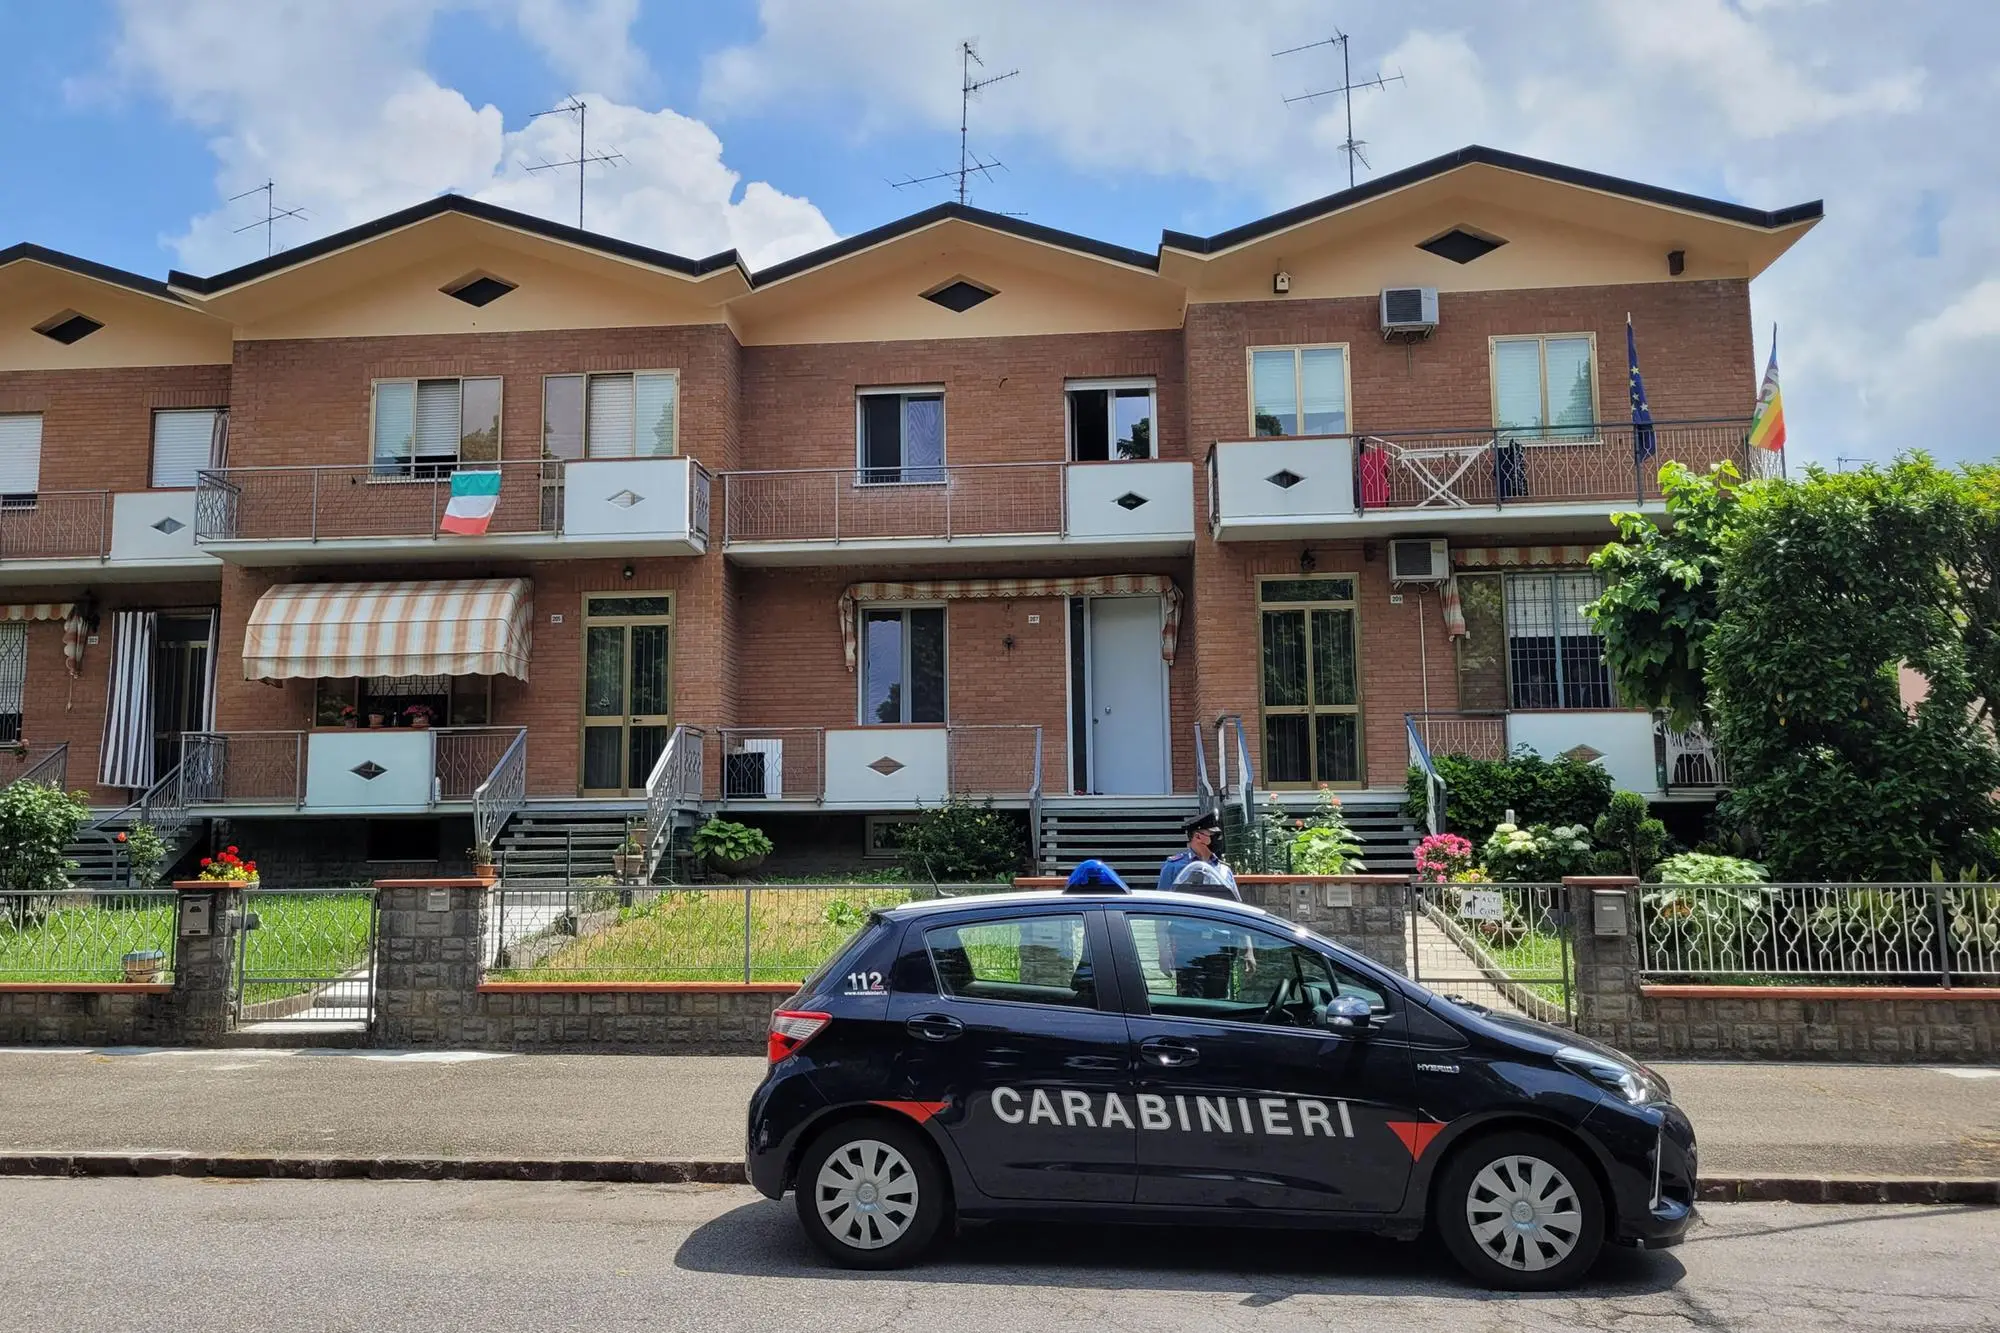 The carabinieri in front of the house (Ansa)